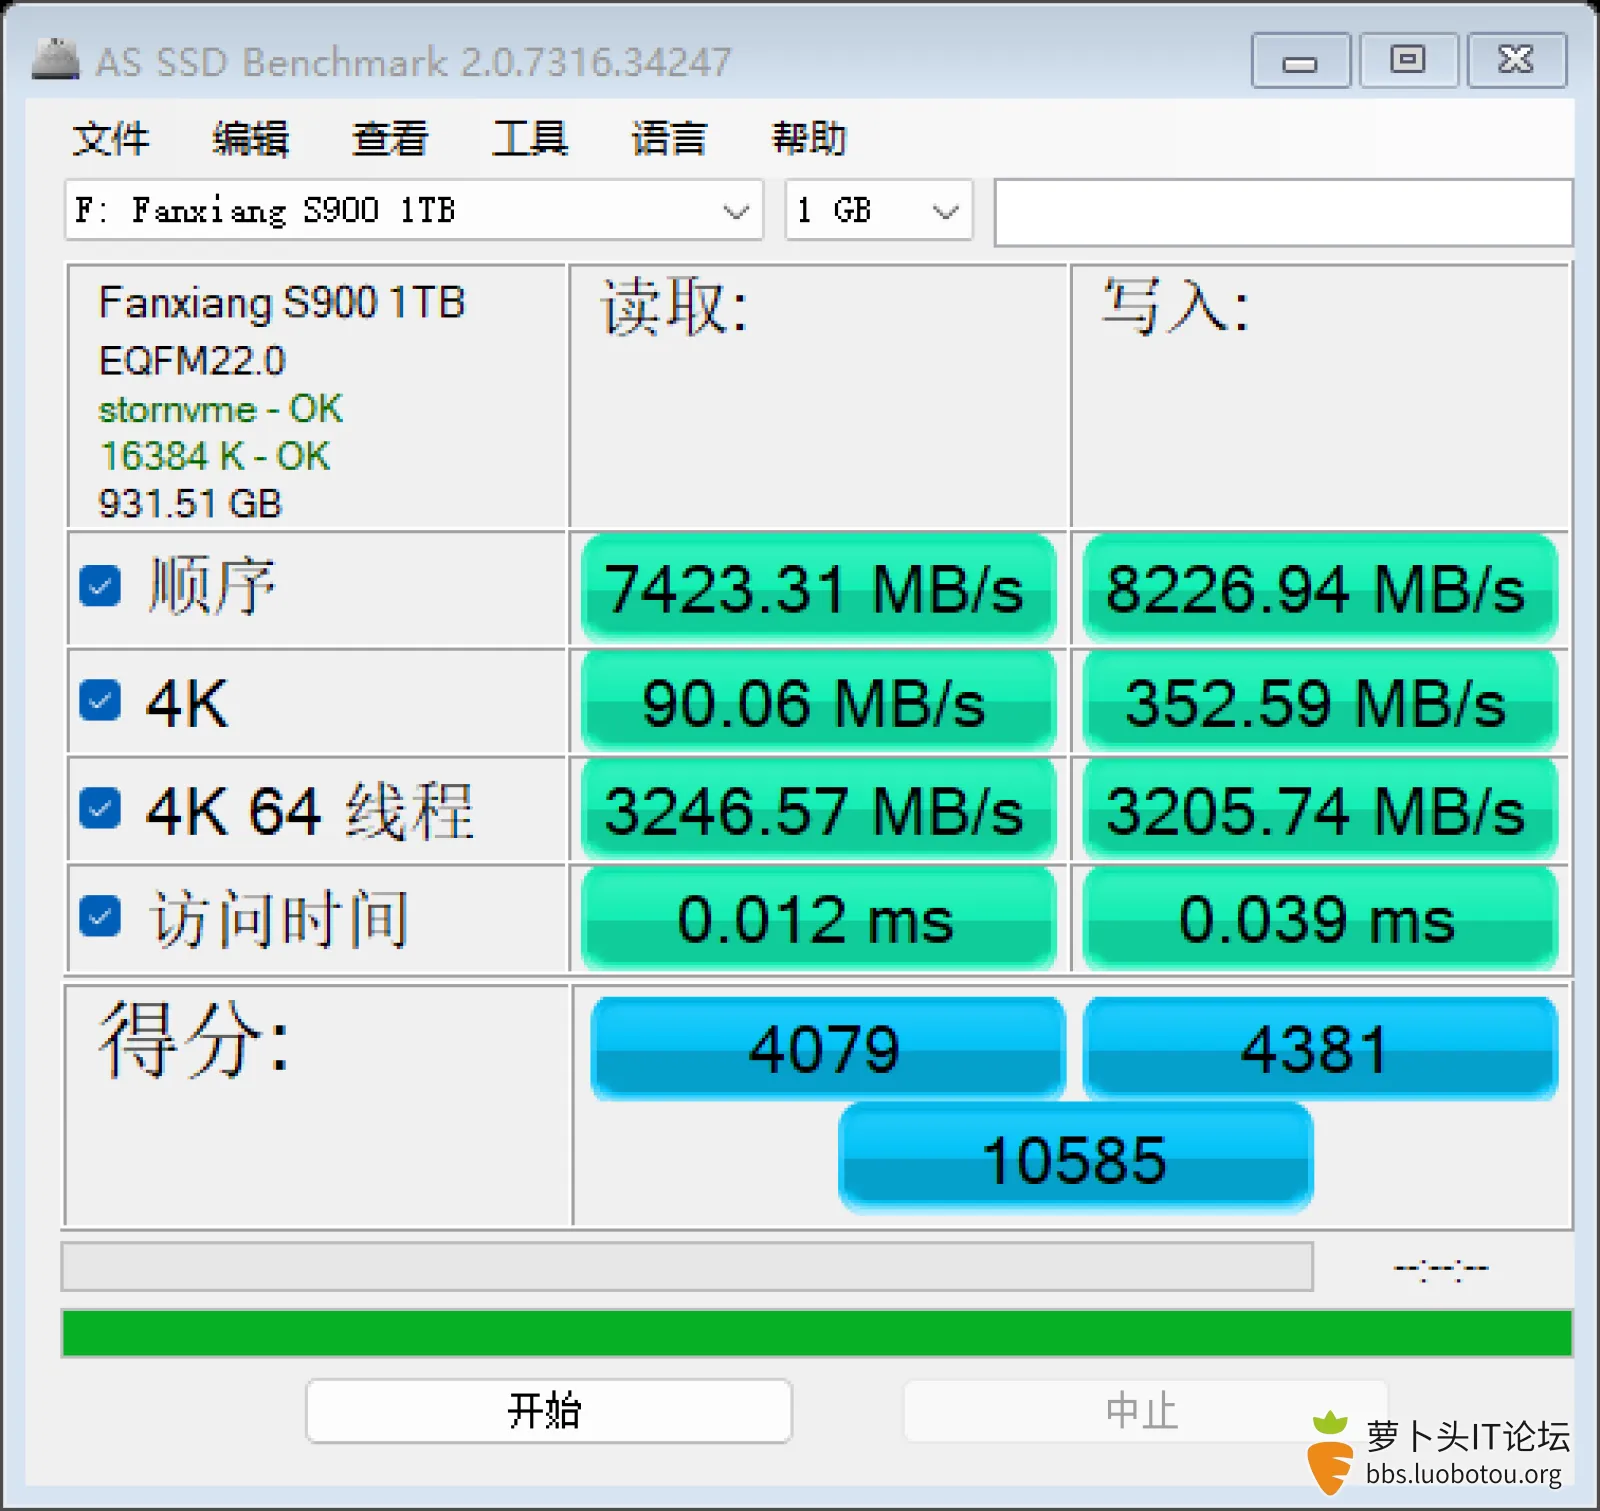 as-ssd-bench Fanxiang S900 1T 2023.6.12 18-02-03.png